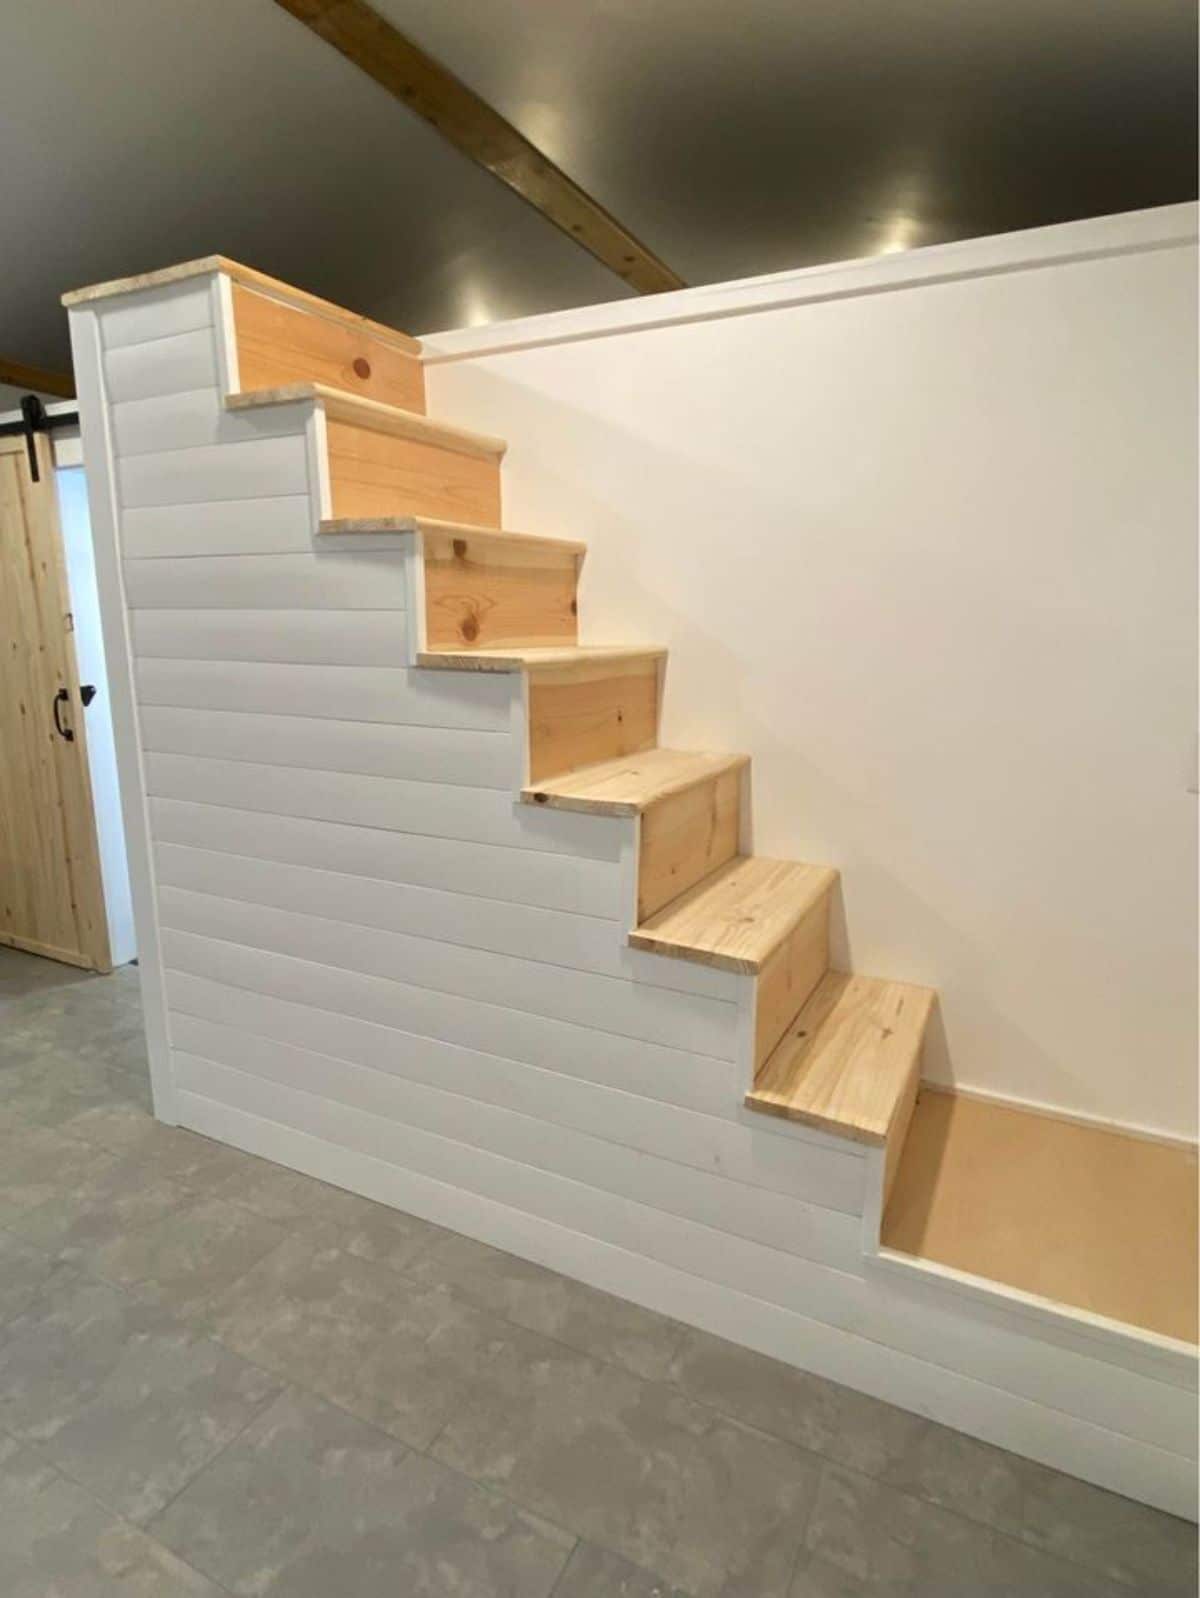 One loft is accessible through stairs and another opposite is accessible through ladder